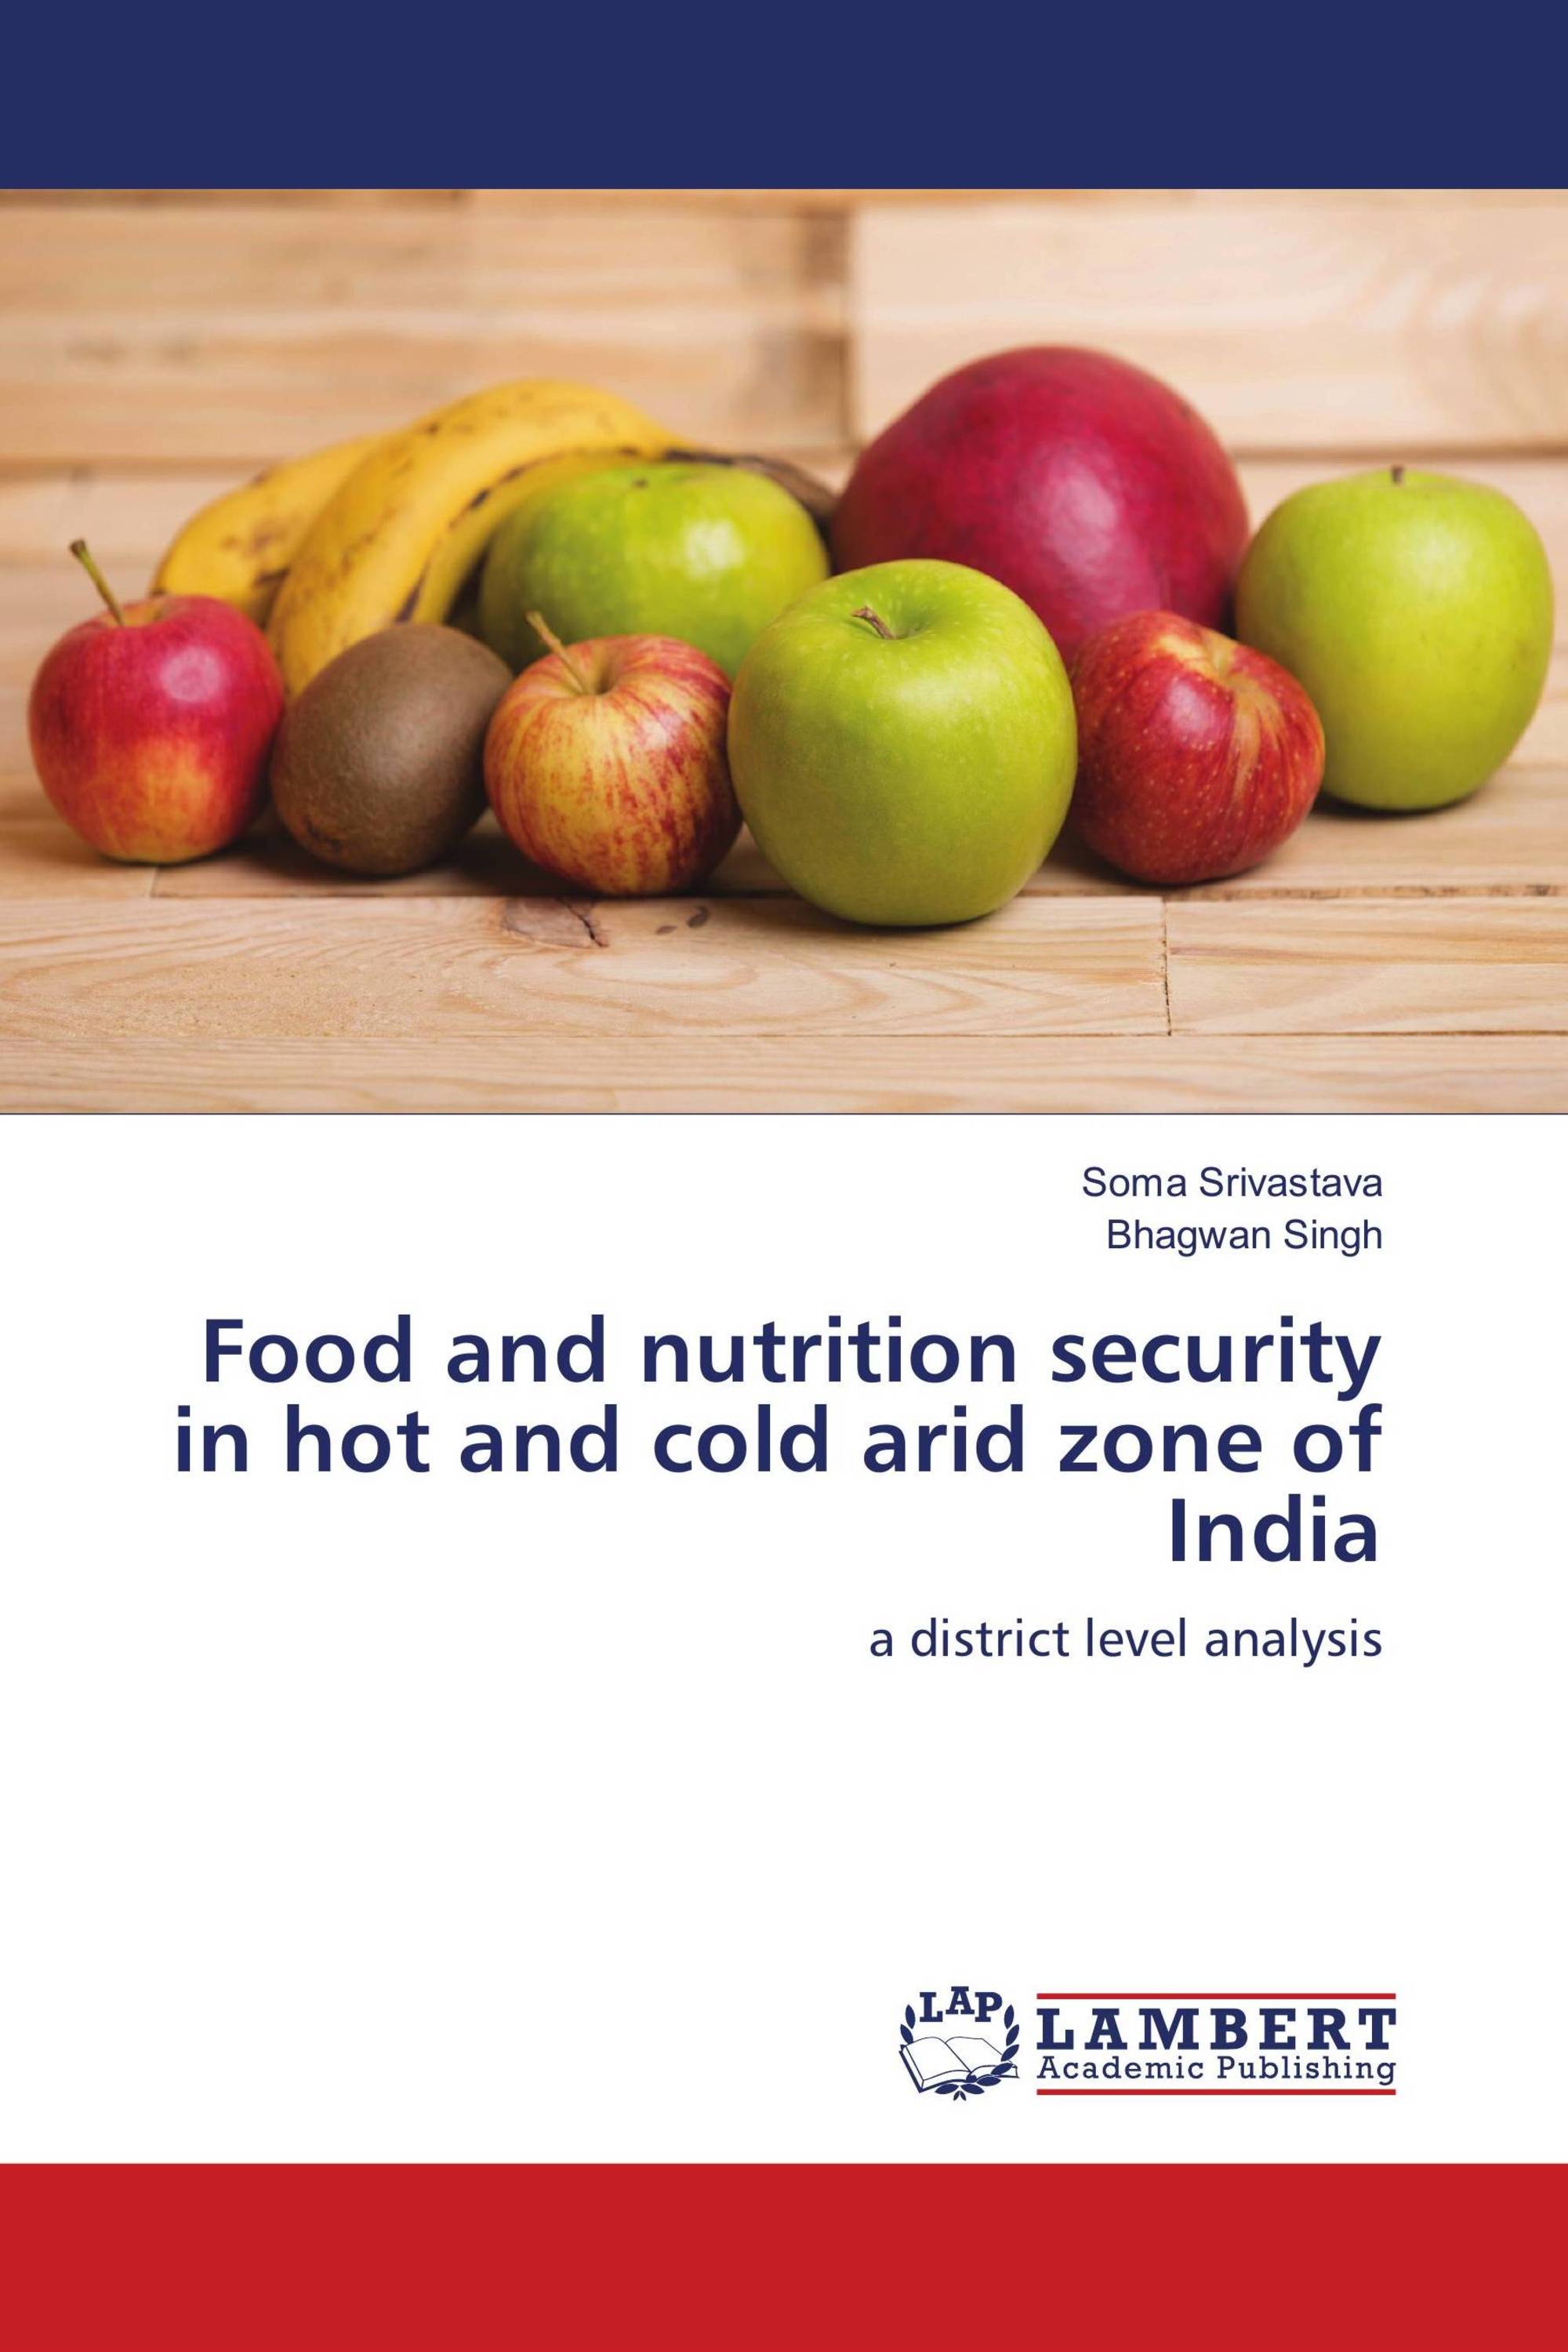 Food and nutrition security in hot and cold arid zone of India